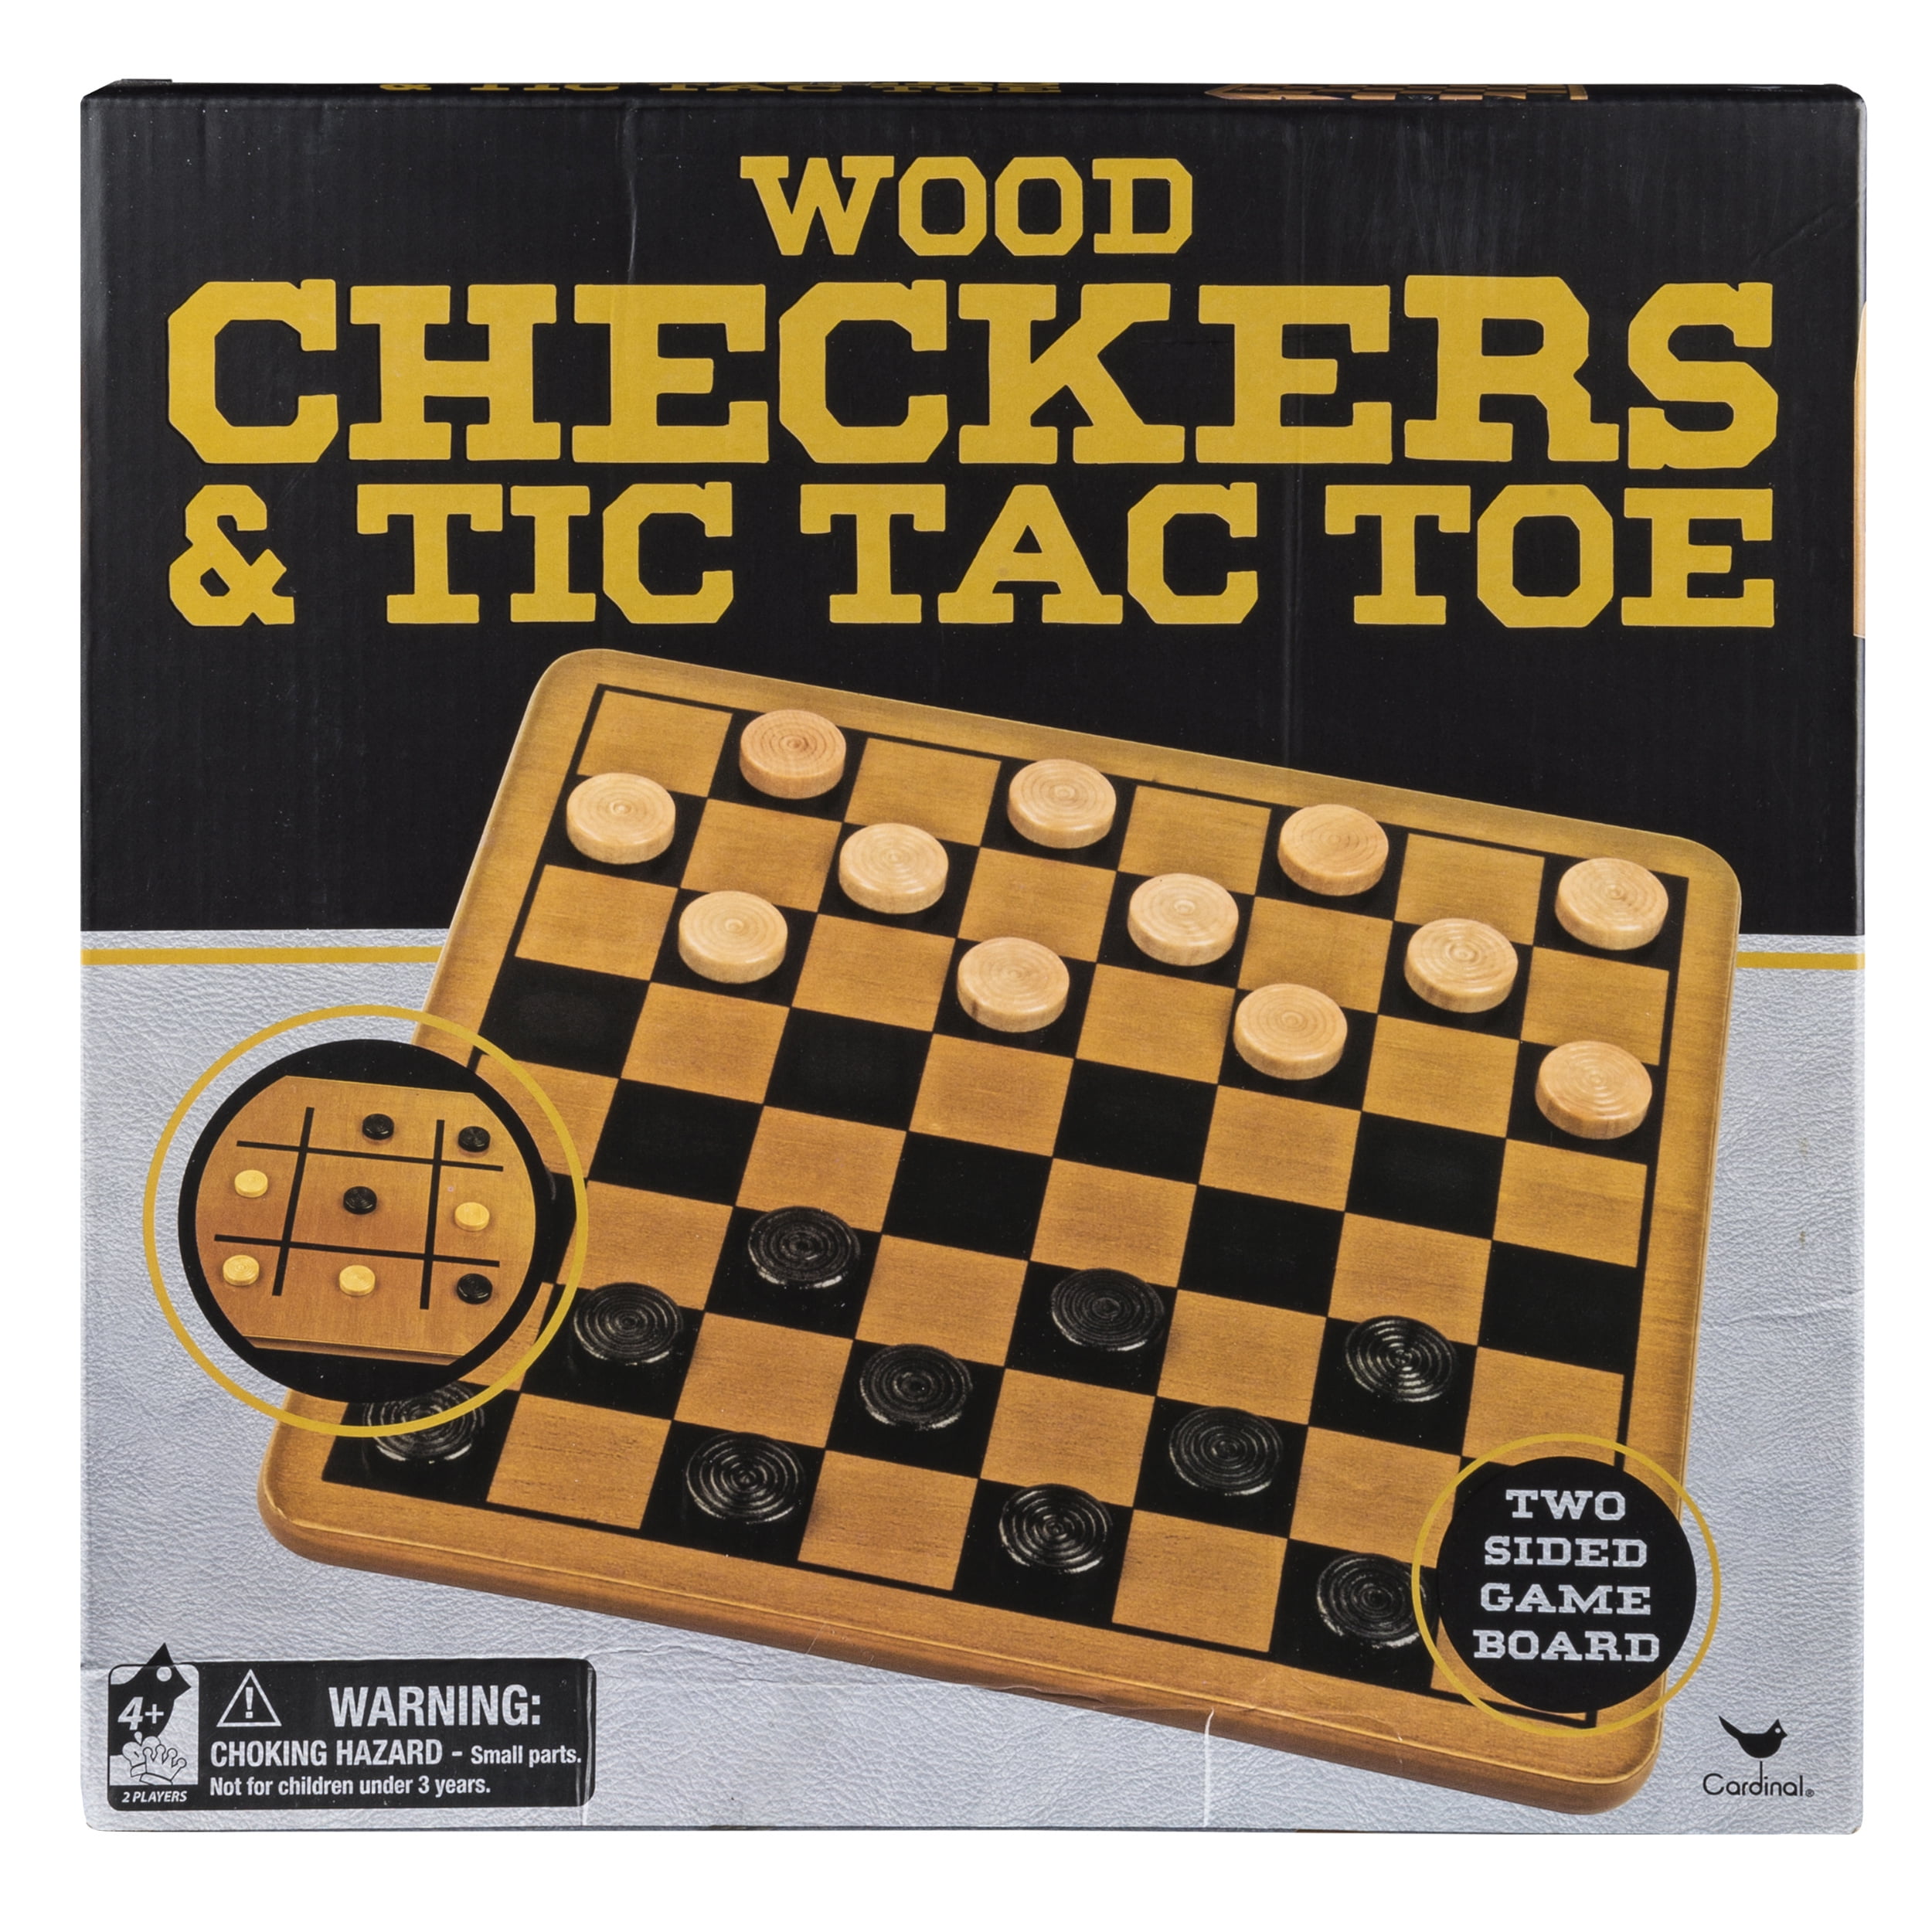 2 Sided Game Board and Pieces Wood Checkers & Tic Tac Toe 